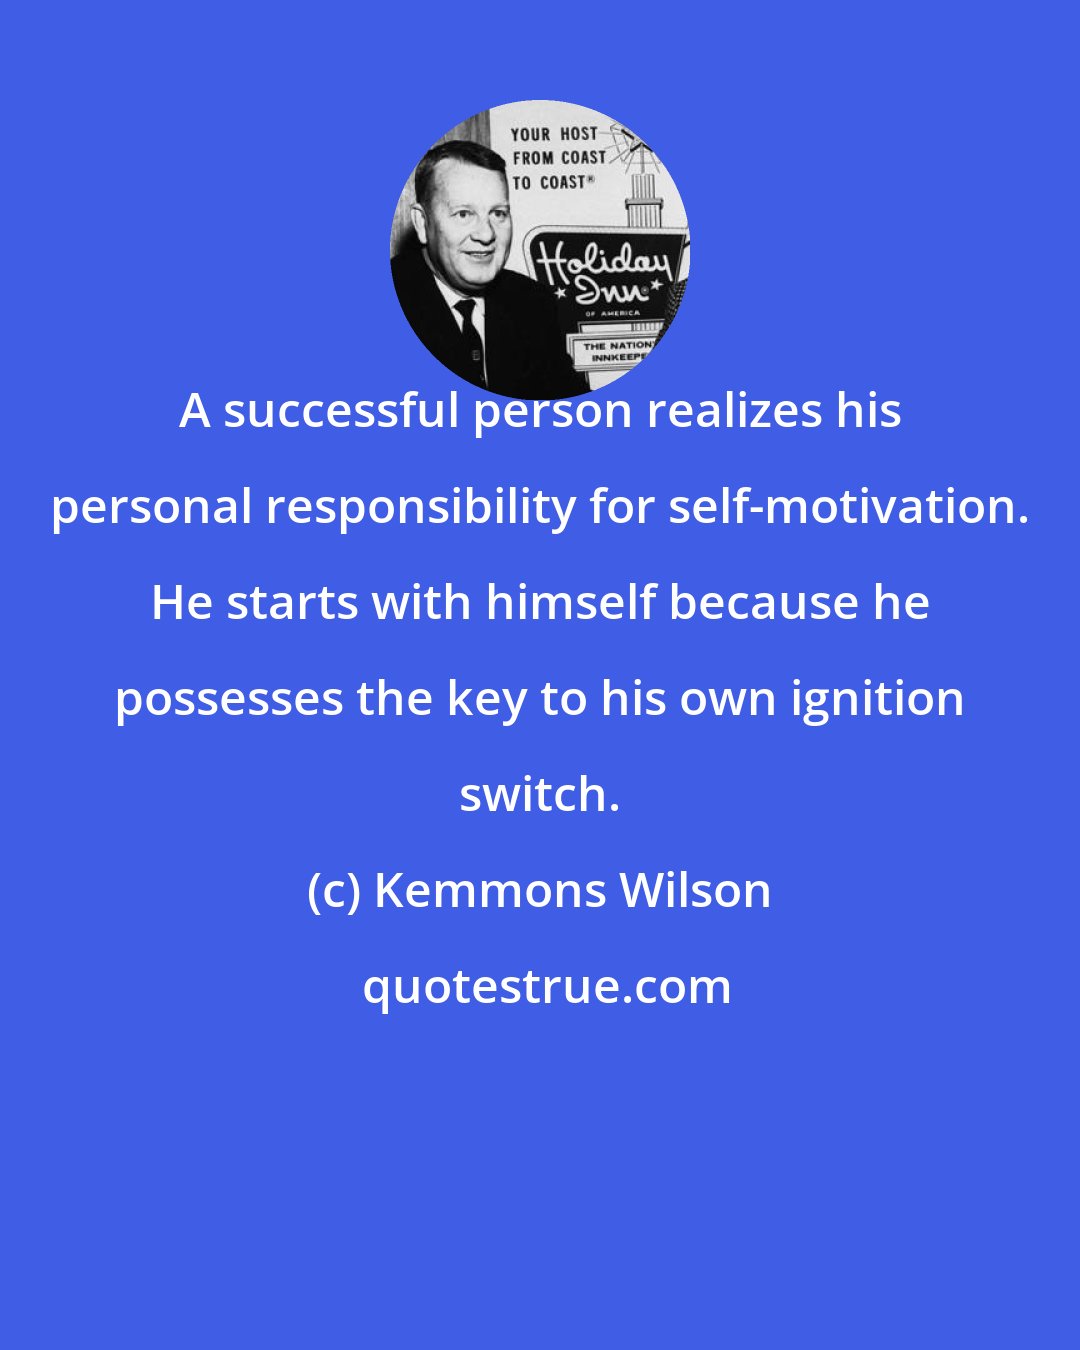 Kemmons Wilson: A successful person realizes his personal responsibility for self-motivation. He starts with himself because he possesses the key to his own ignition switch.